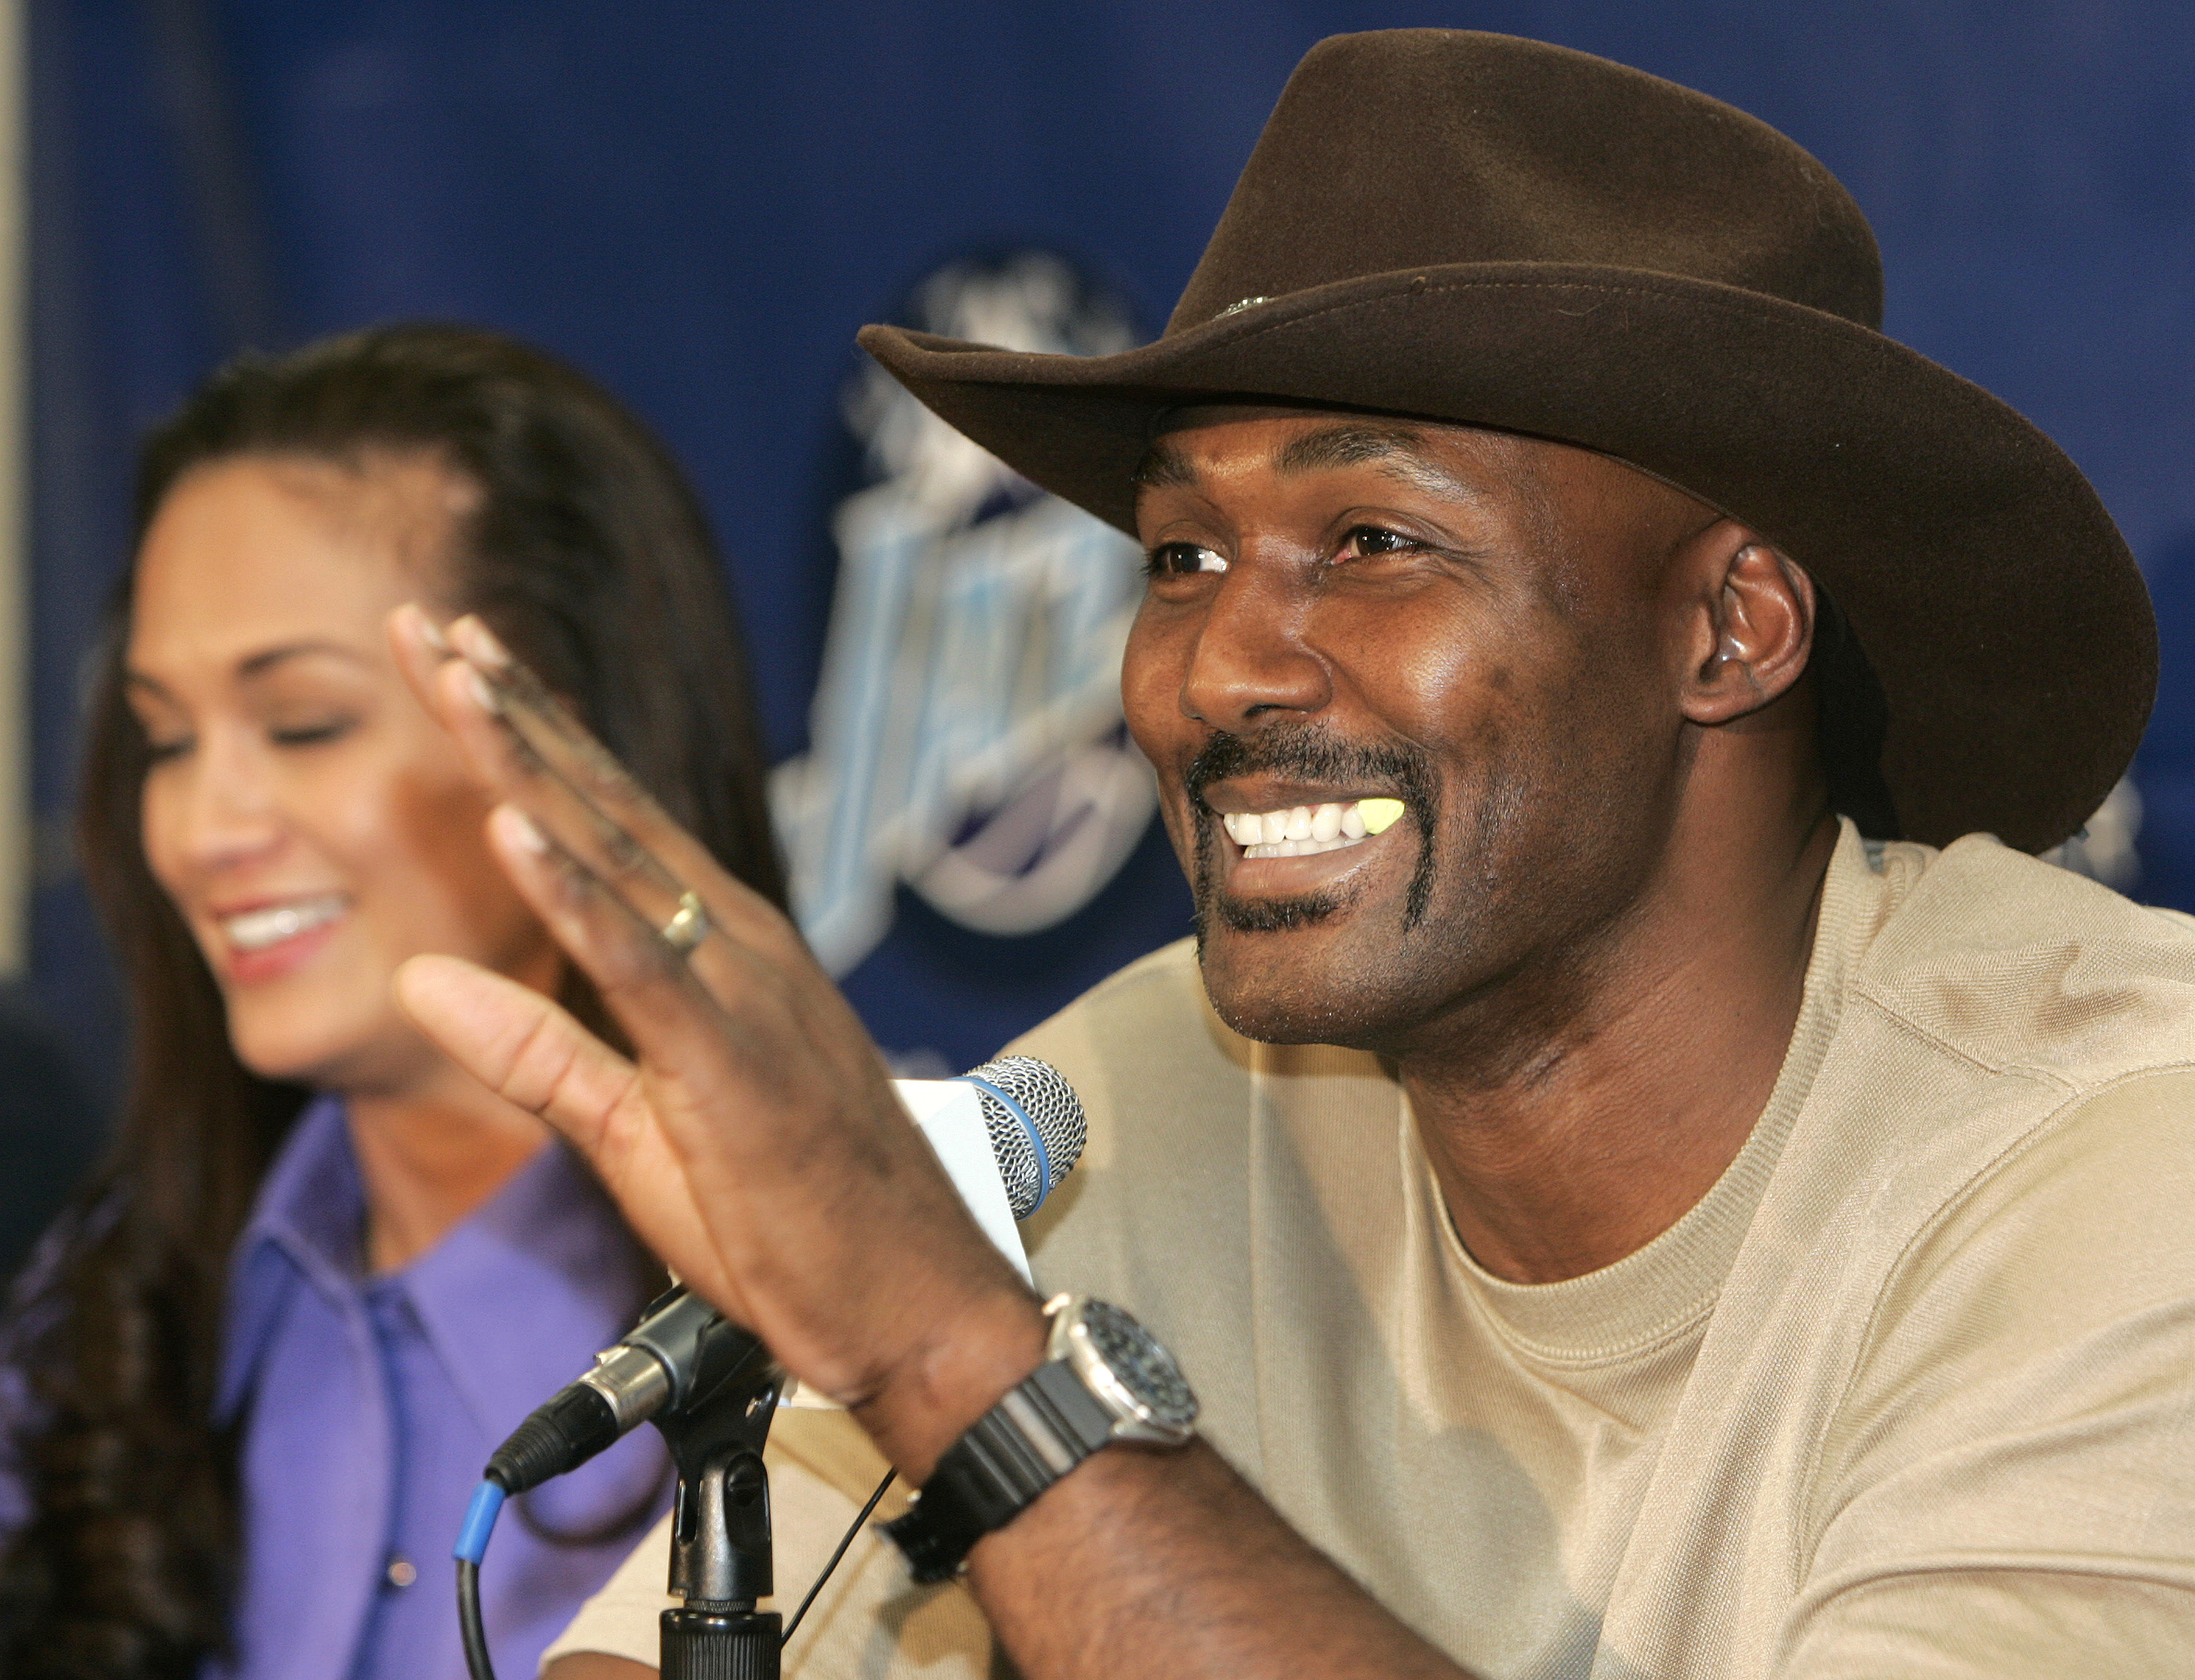 SALT LAKE CITY - FEBRUARY 13:  Karl Malone gestures as he announces his retirement from playing NBA basketball as his wife Kay (L) listens on February 13, 2005 at the Delta Center in Salt Lake City, Utah. Malone played 19 years in the NBA, 18 with the Uta